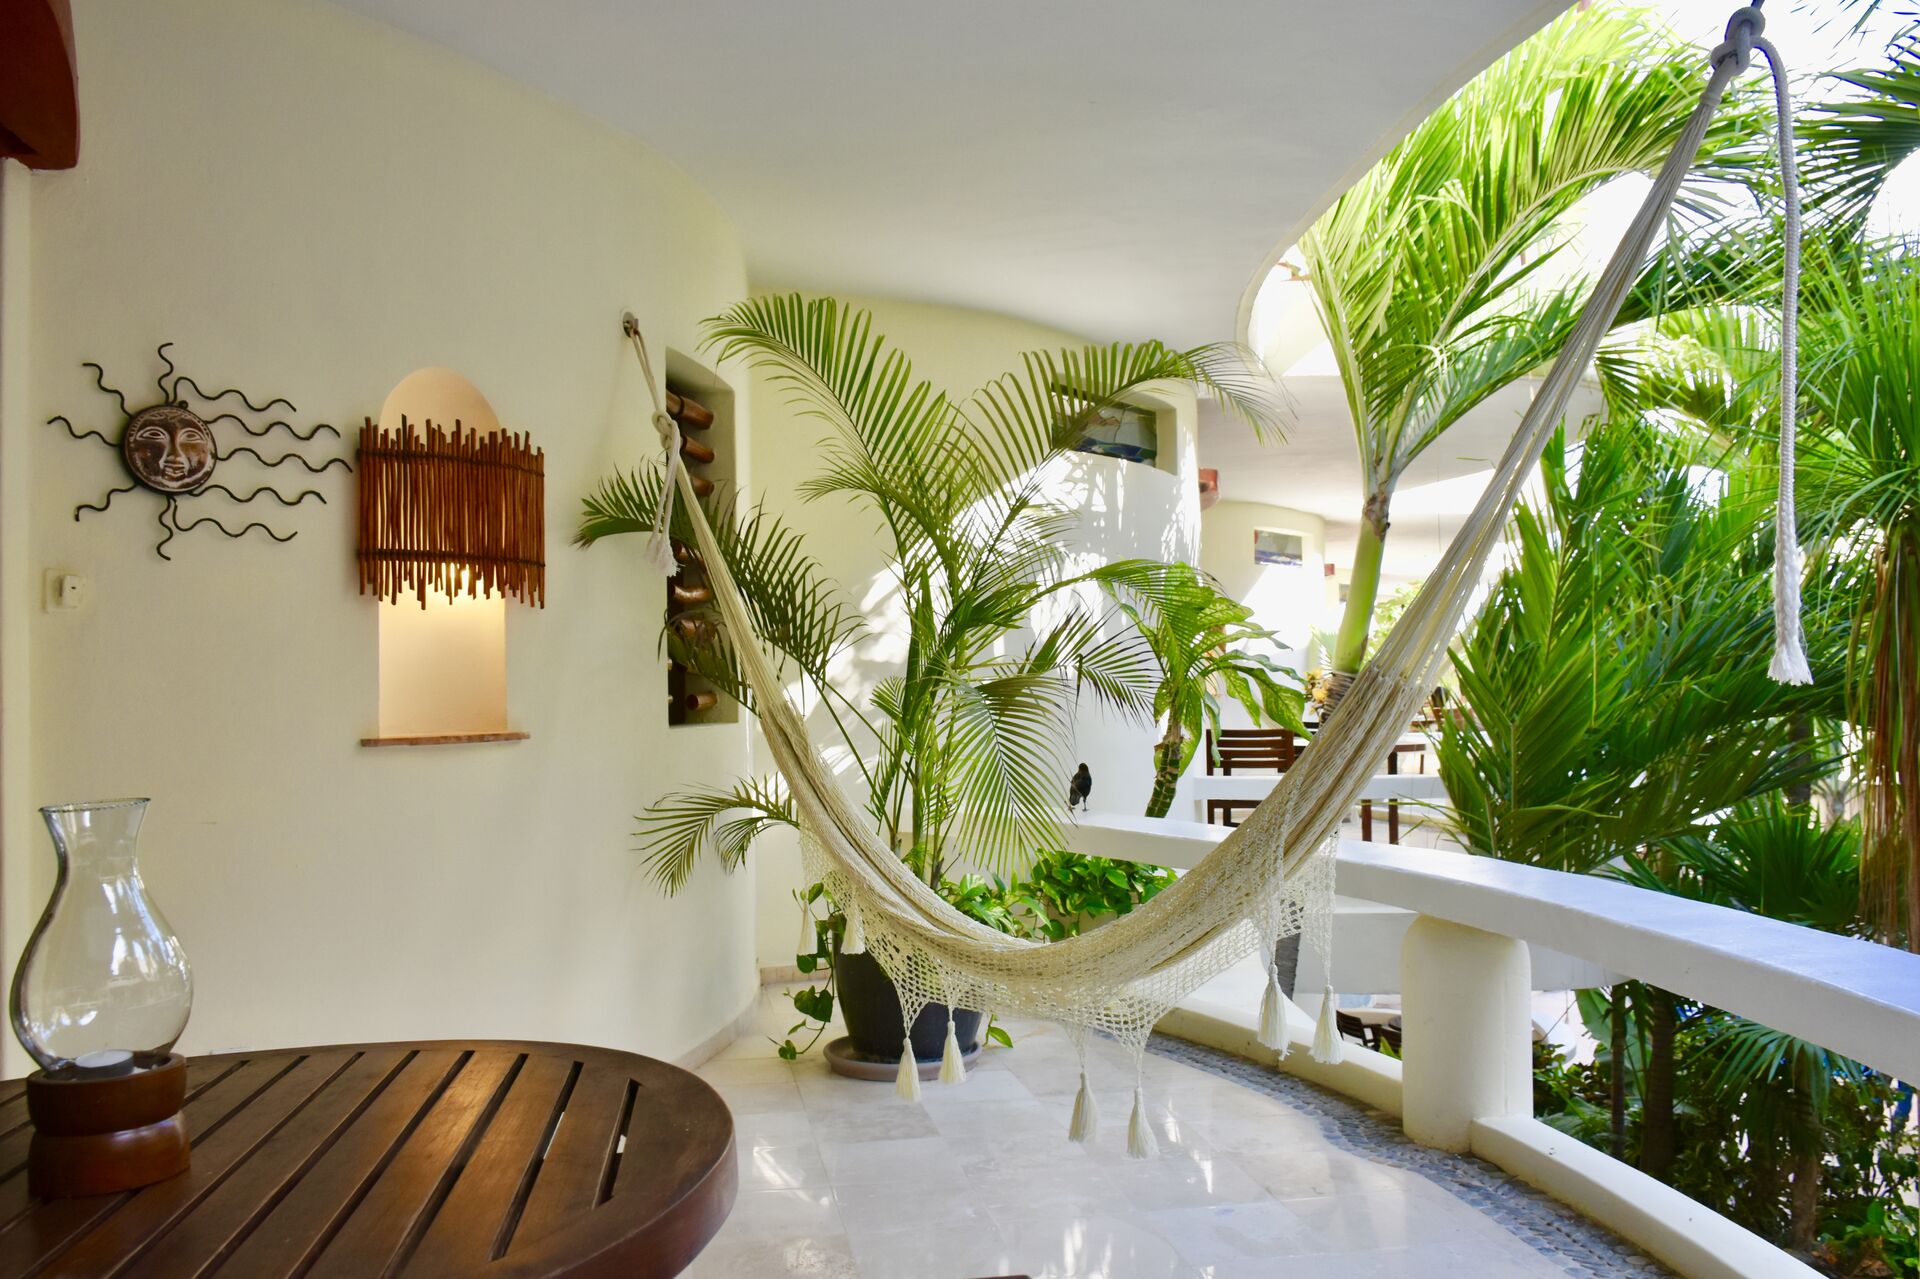 Partial ocean view balcony with chairs and hammock.